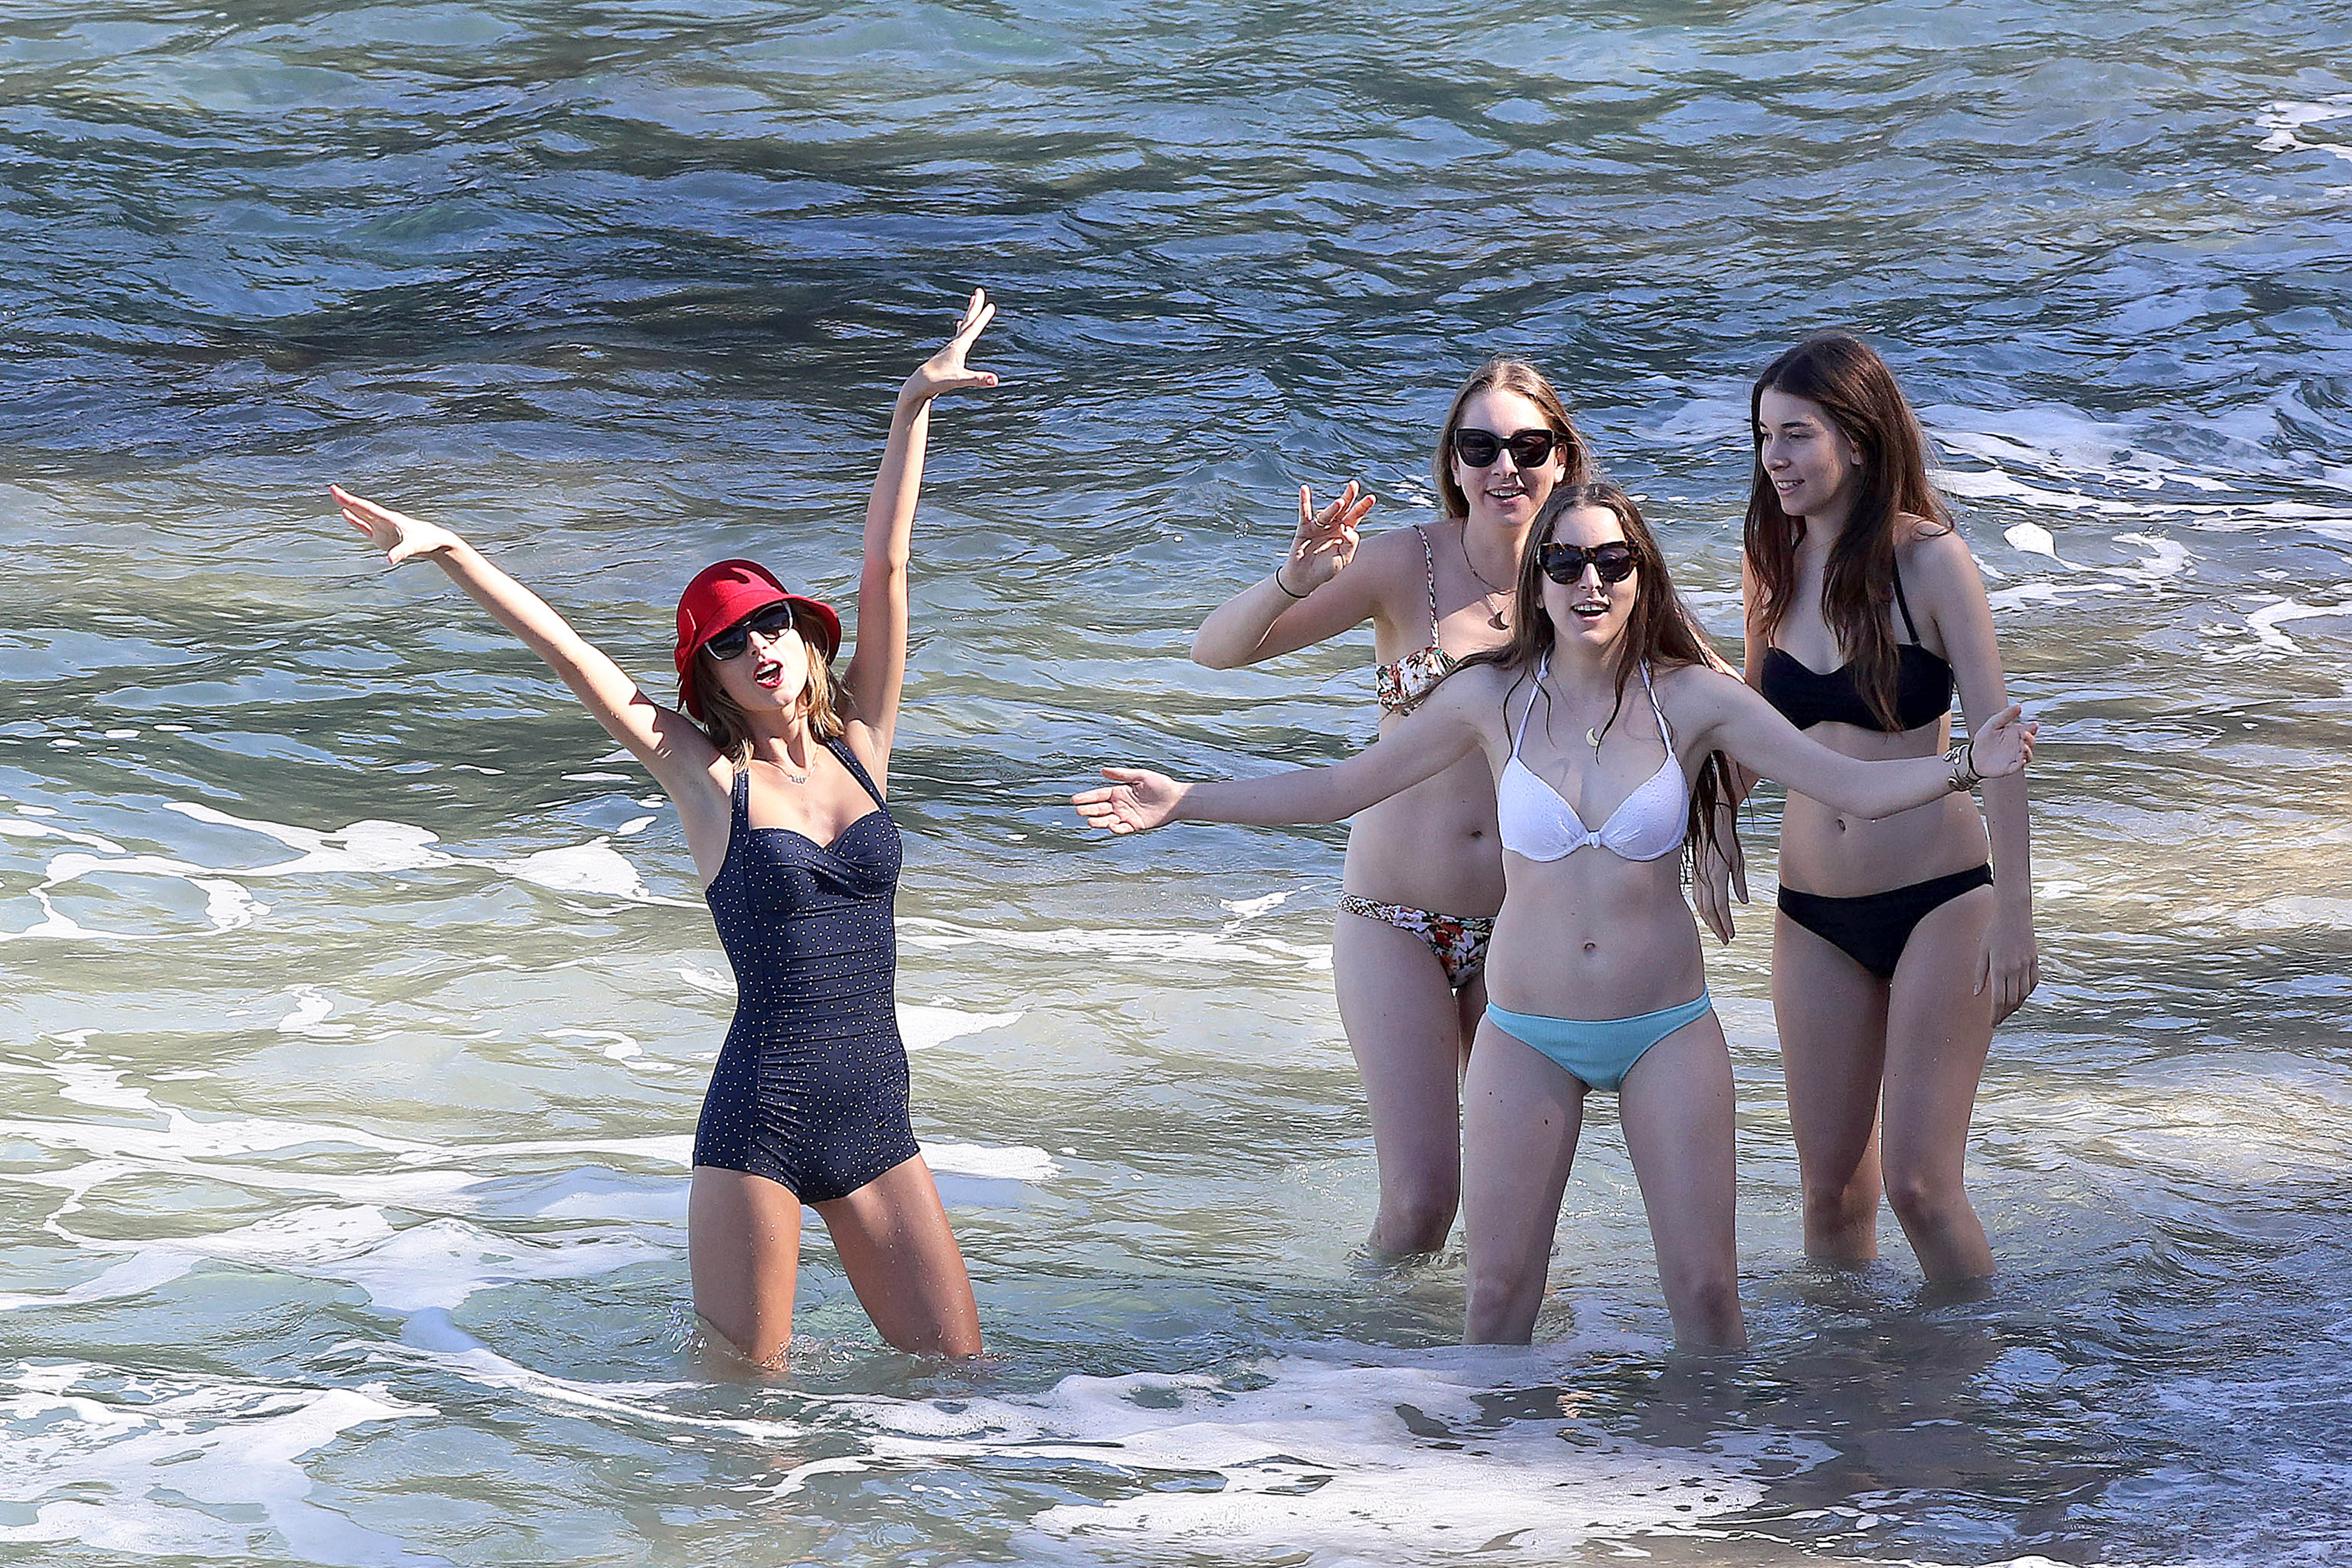 https://celebrityslips.com/wp-content/uploads/2015/01/taylor-swift-bathing-suit-and-her-friends-at-the-beach-3.jpg